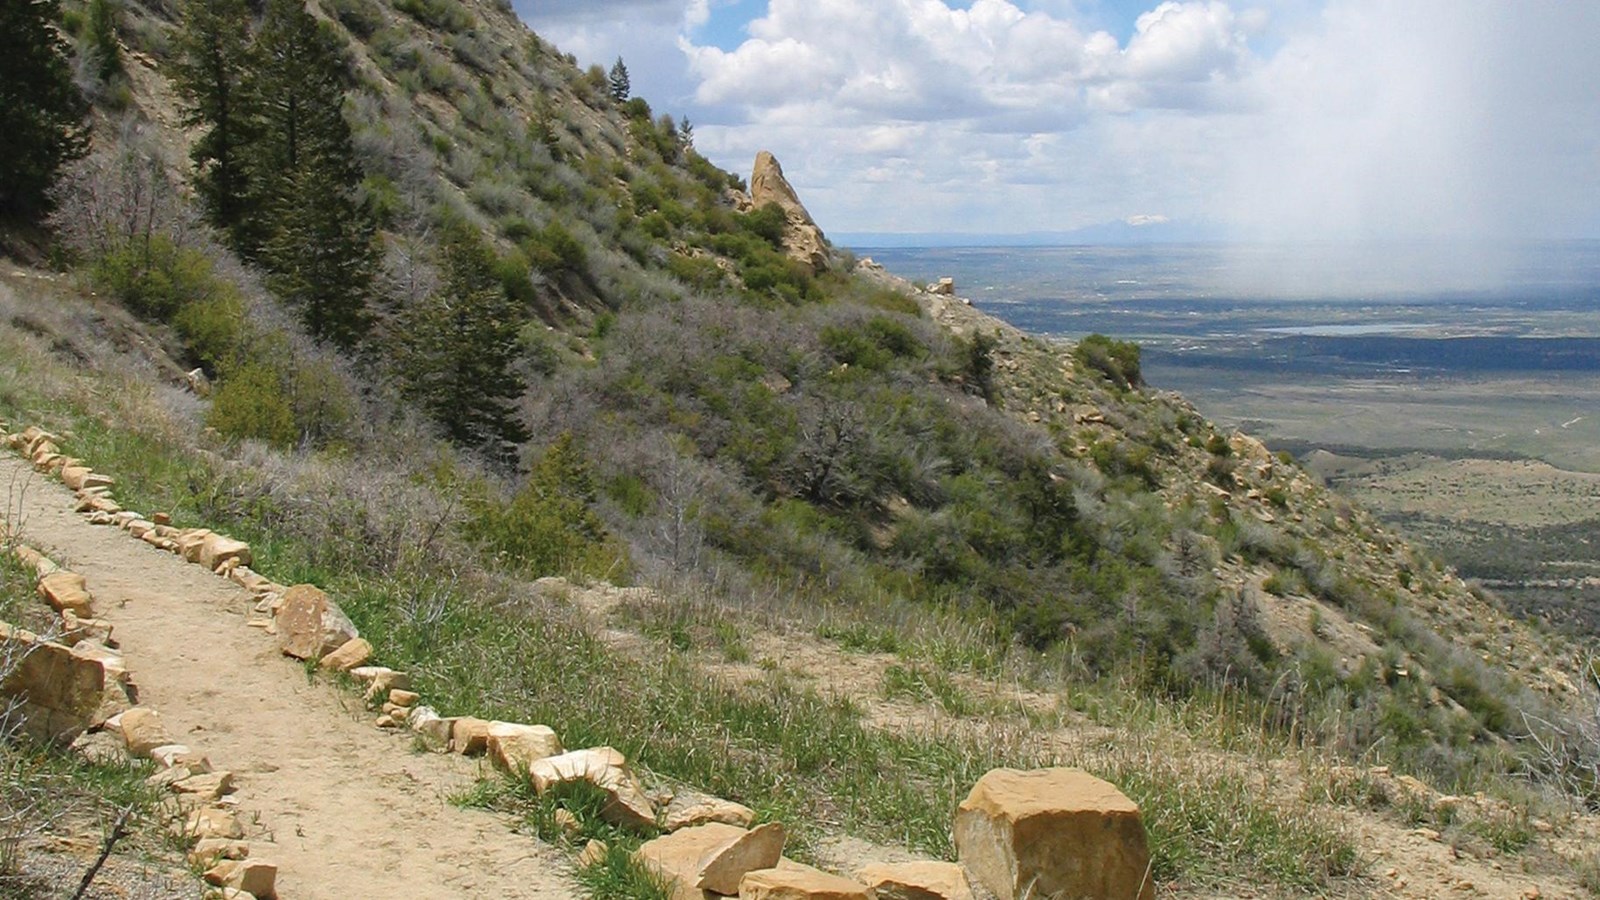 Dirt trail, lined with stones, traverses a ridge with view of a green valley in the distance below.